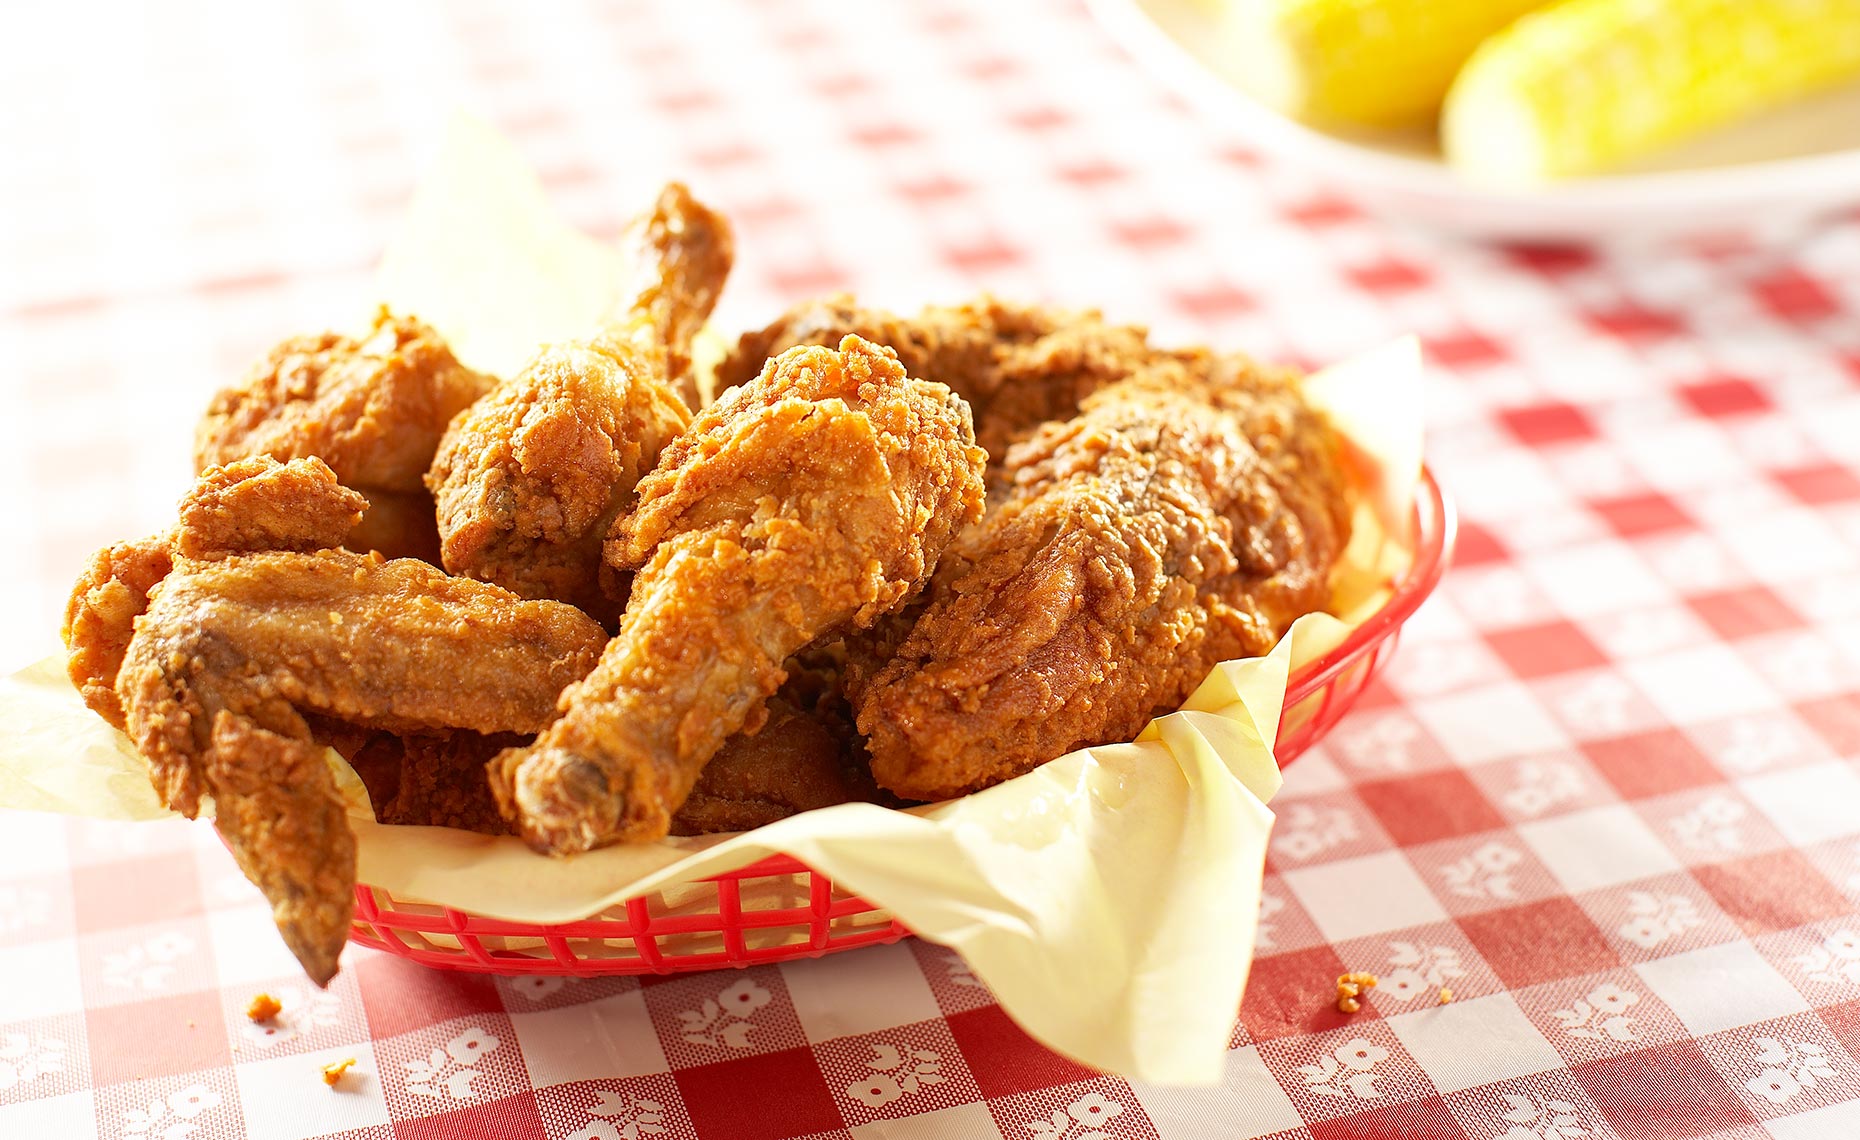 Fried Chicken on Picnic Table